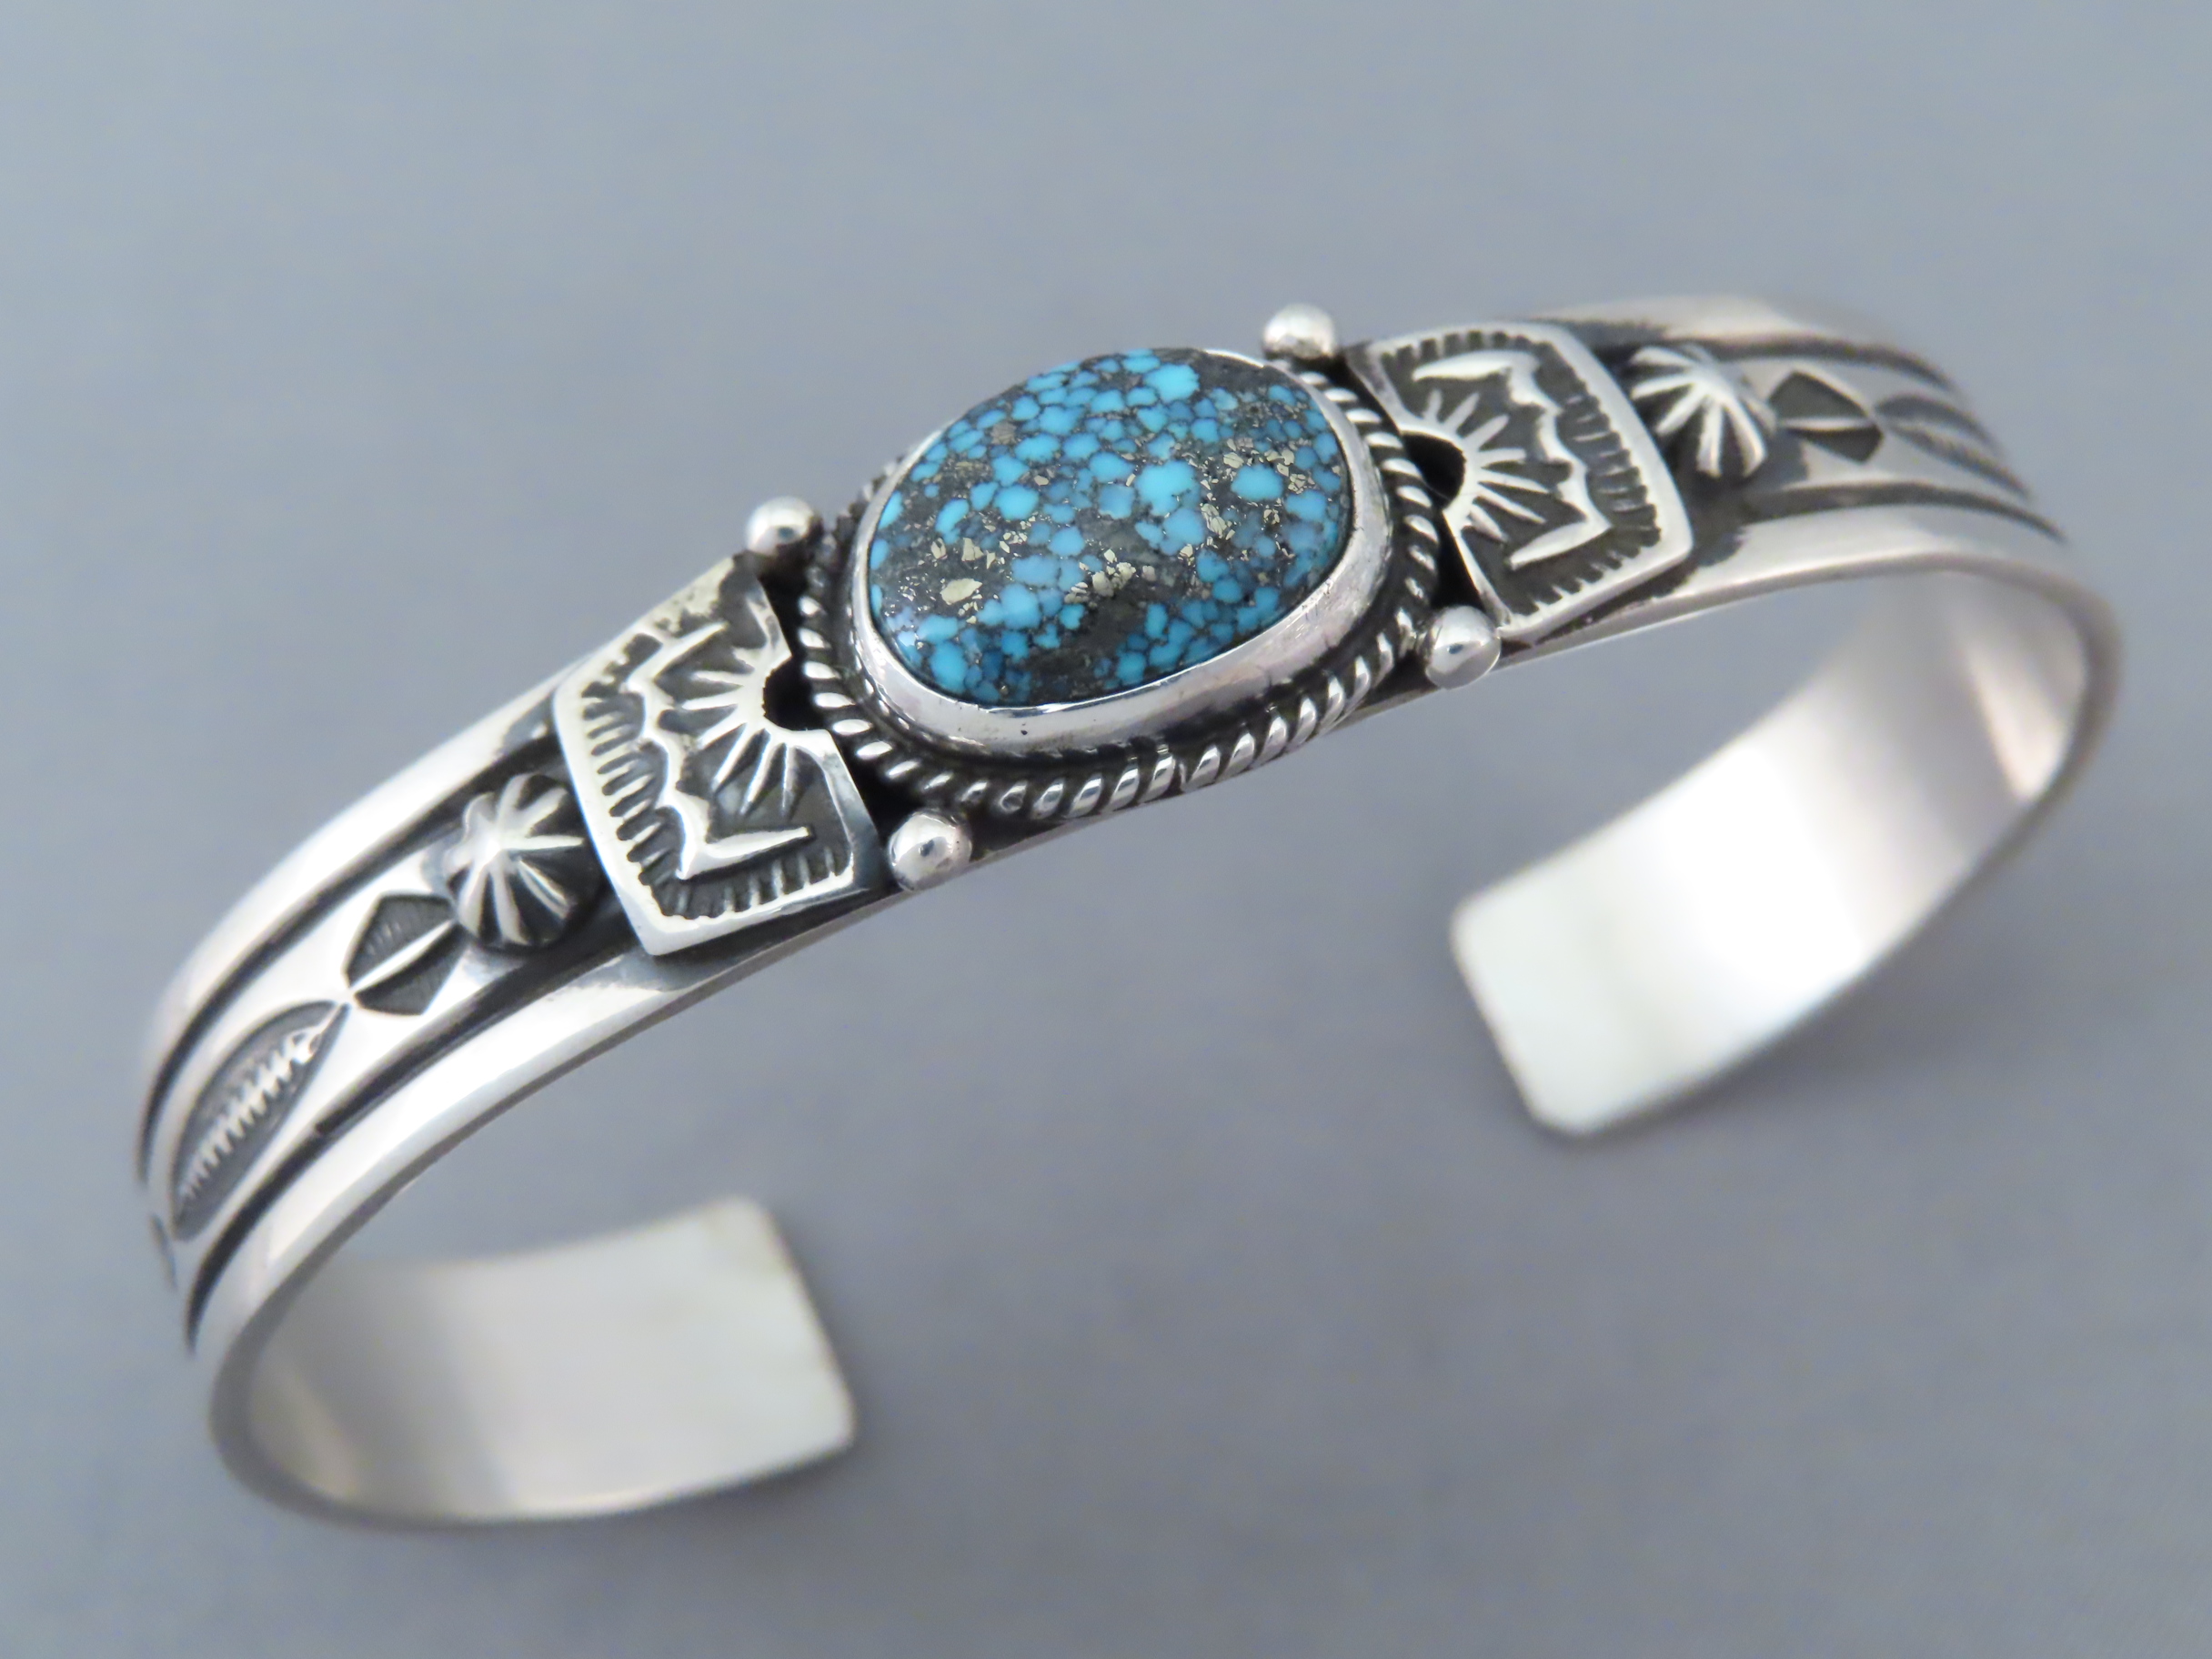 Narrow Kingman Turquoise Cuff Bracelet by Native American Navajo Indian jewelry artist, Happy Piasso $350- FOR SALE